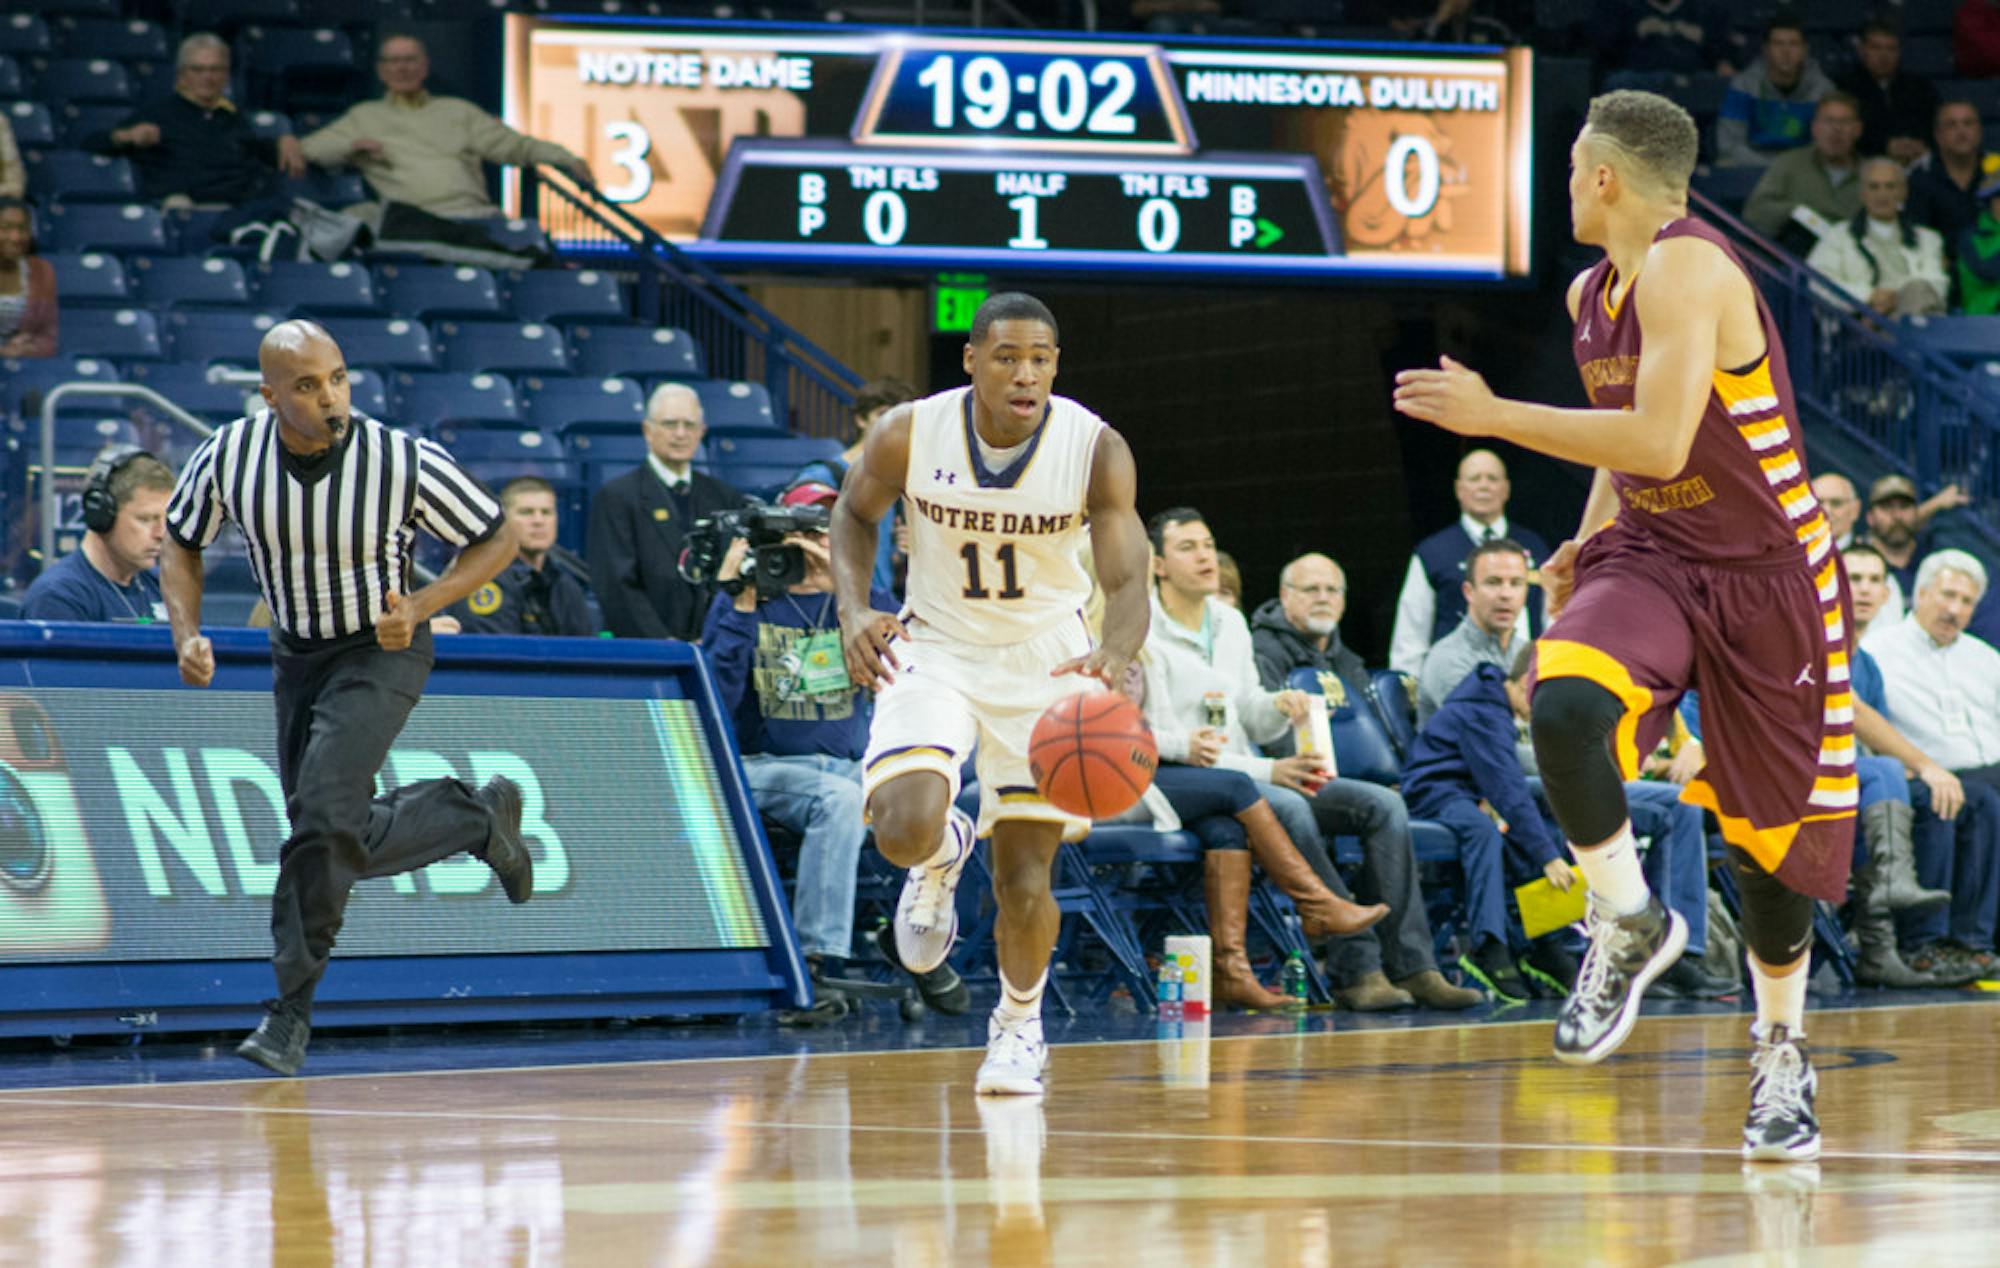 Irish sophomore guard Demetrius Jackson brings the ball up during Saturday’s exhibition win over Minnesota Duluth at Purcell Pavilion.